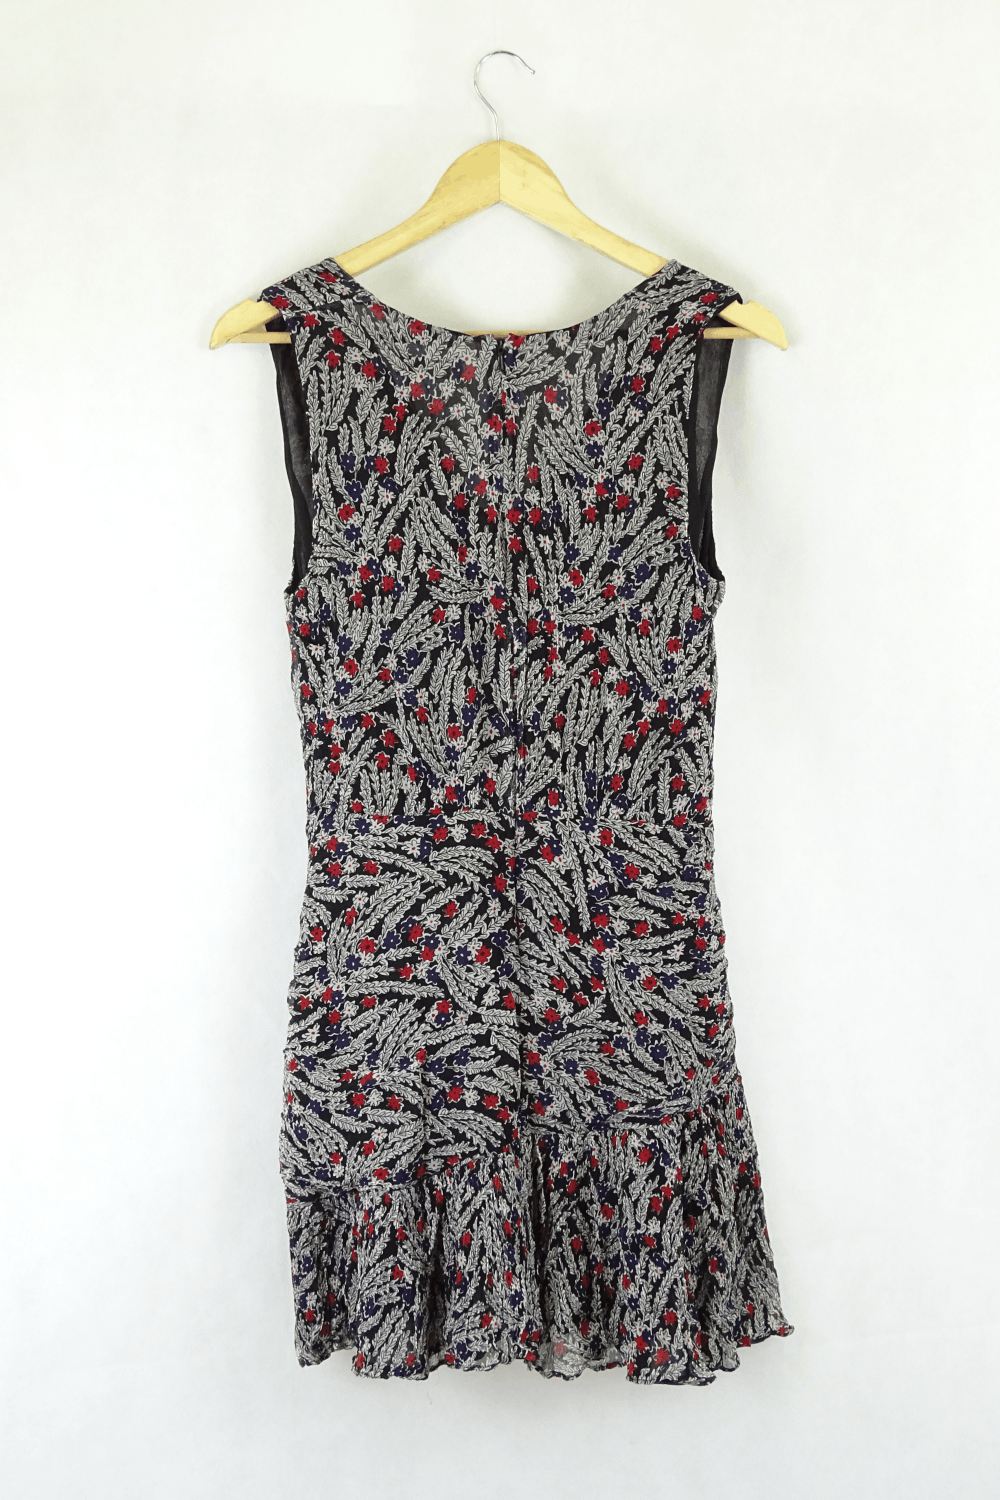 Stevie May Floral Dress M